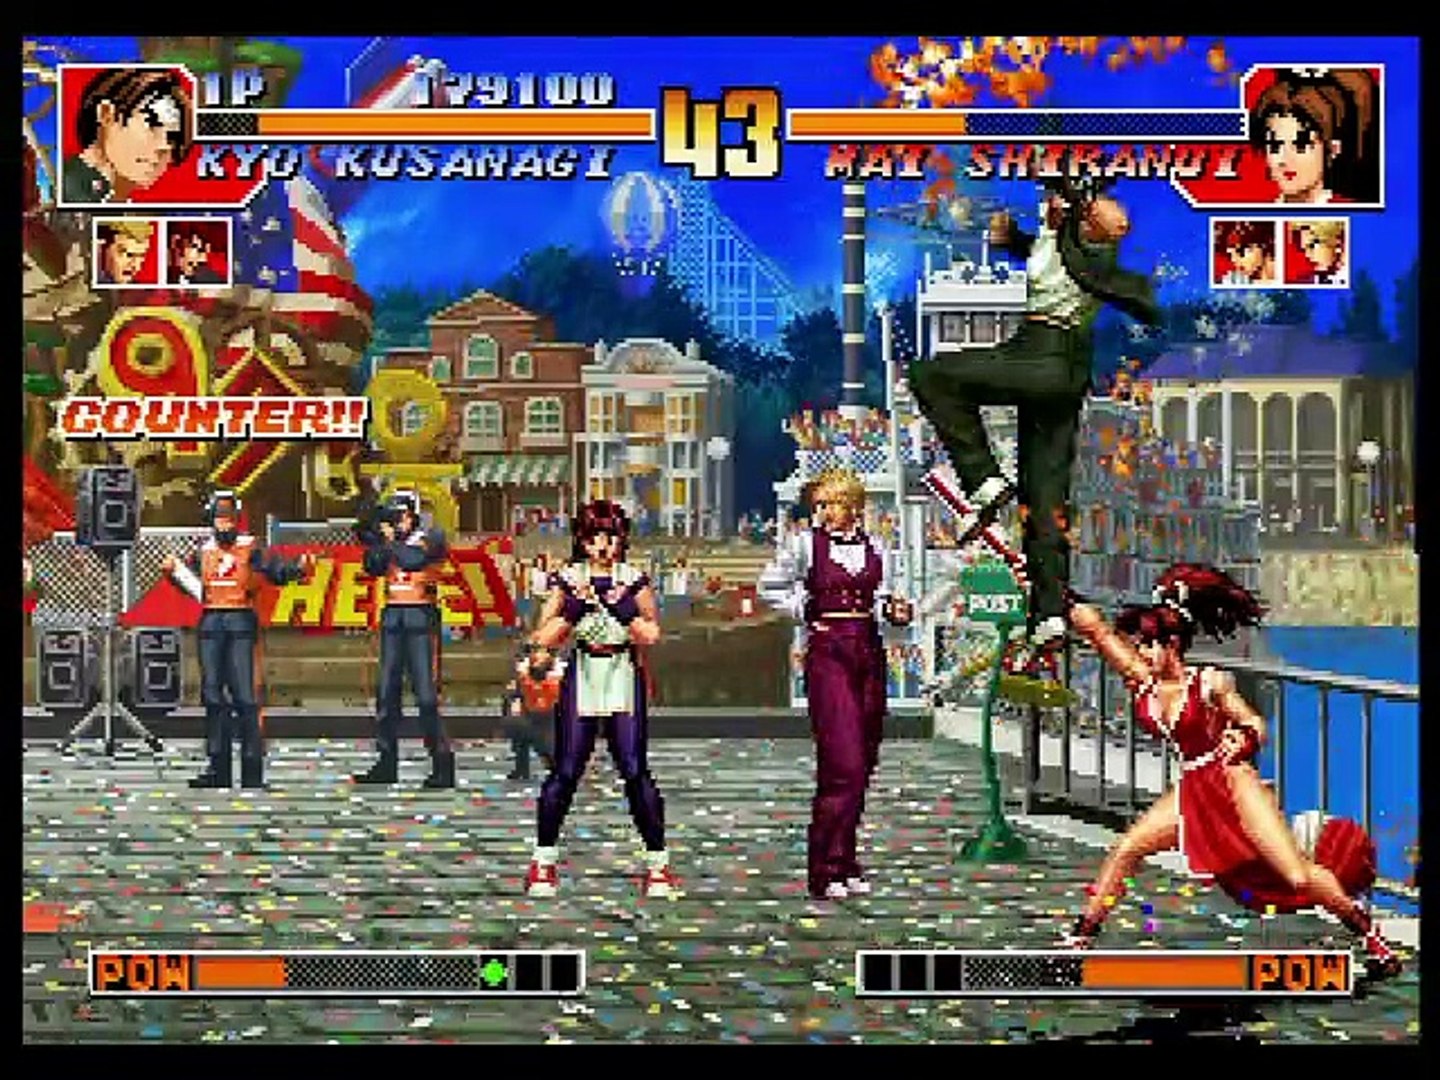 The King of Fighters '97 (Arcade 1997) - Women Fighters Team  [Playthrough/LongPlay] 